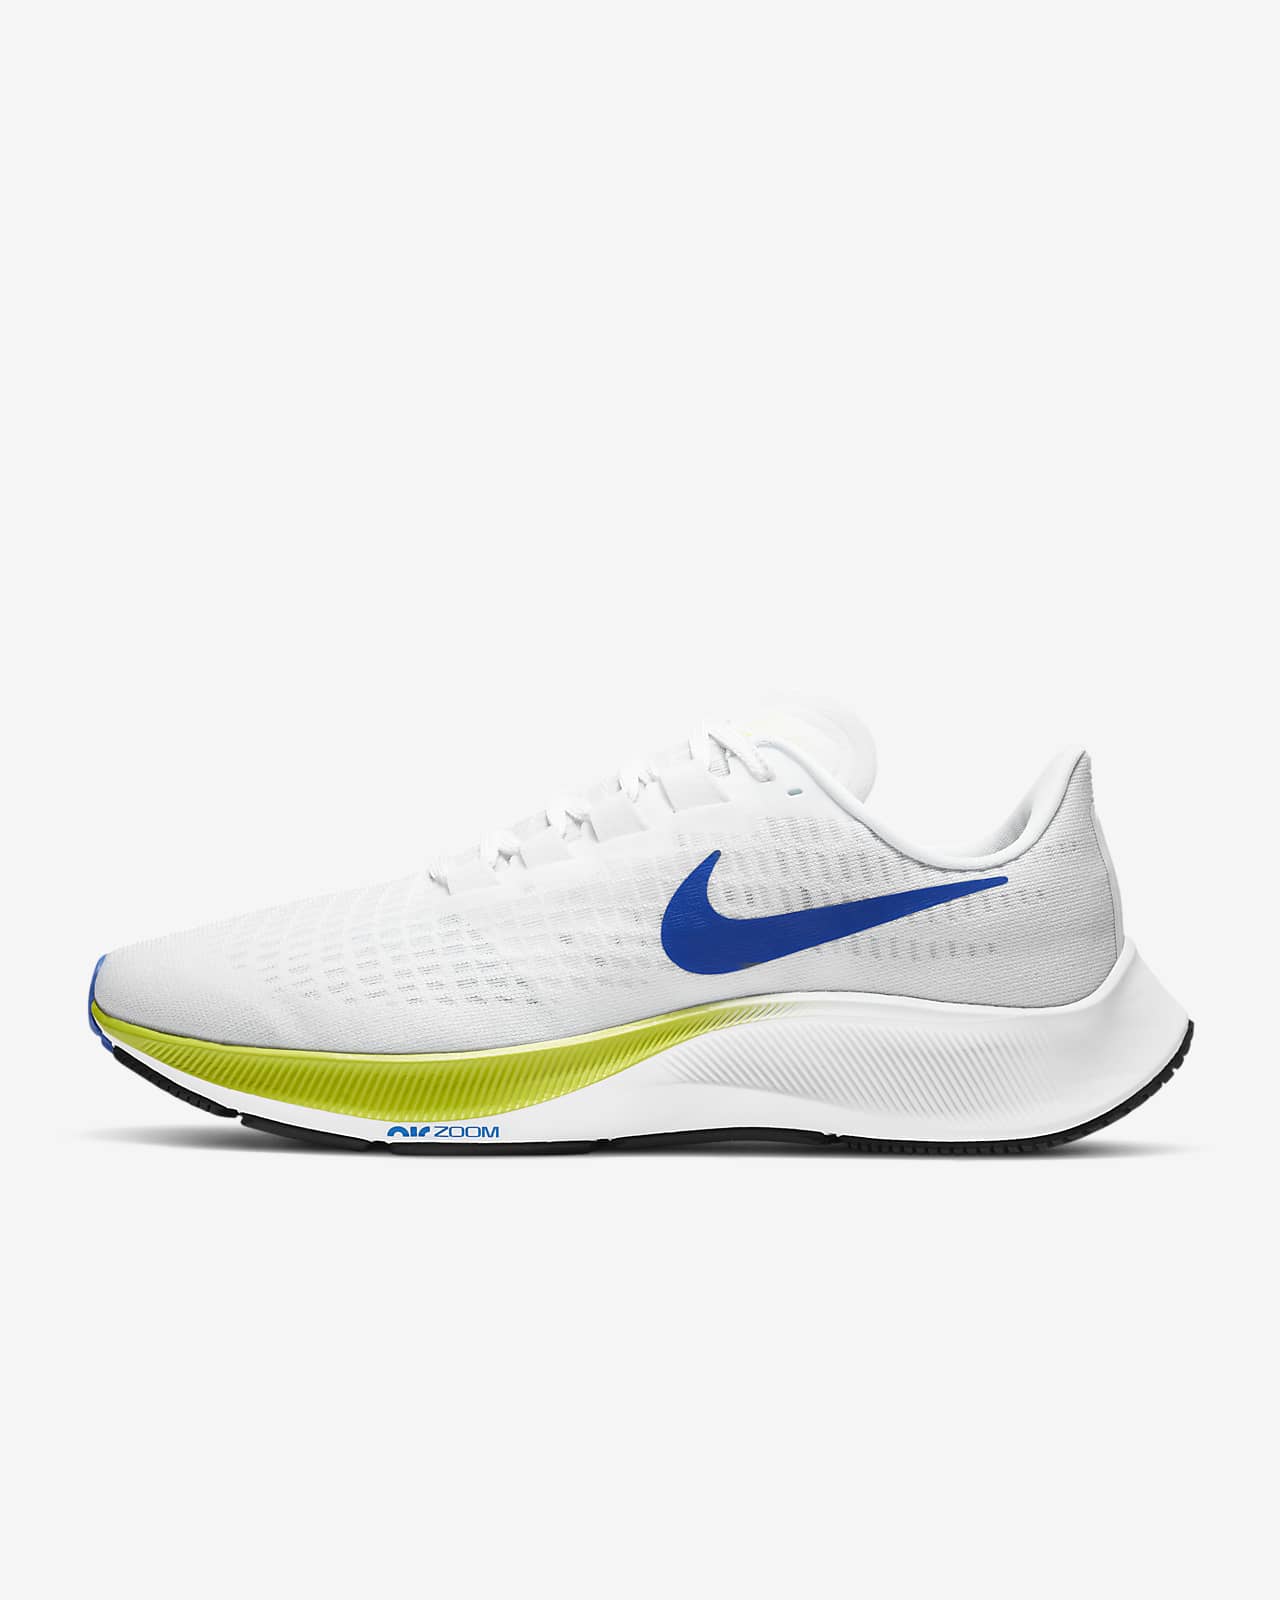 when does nike pegasus 37 come out